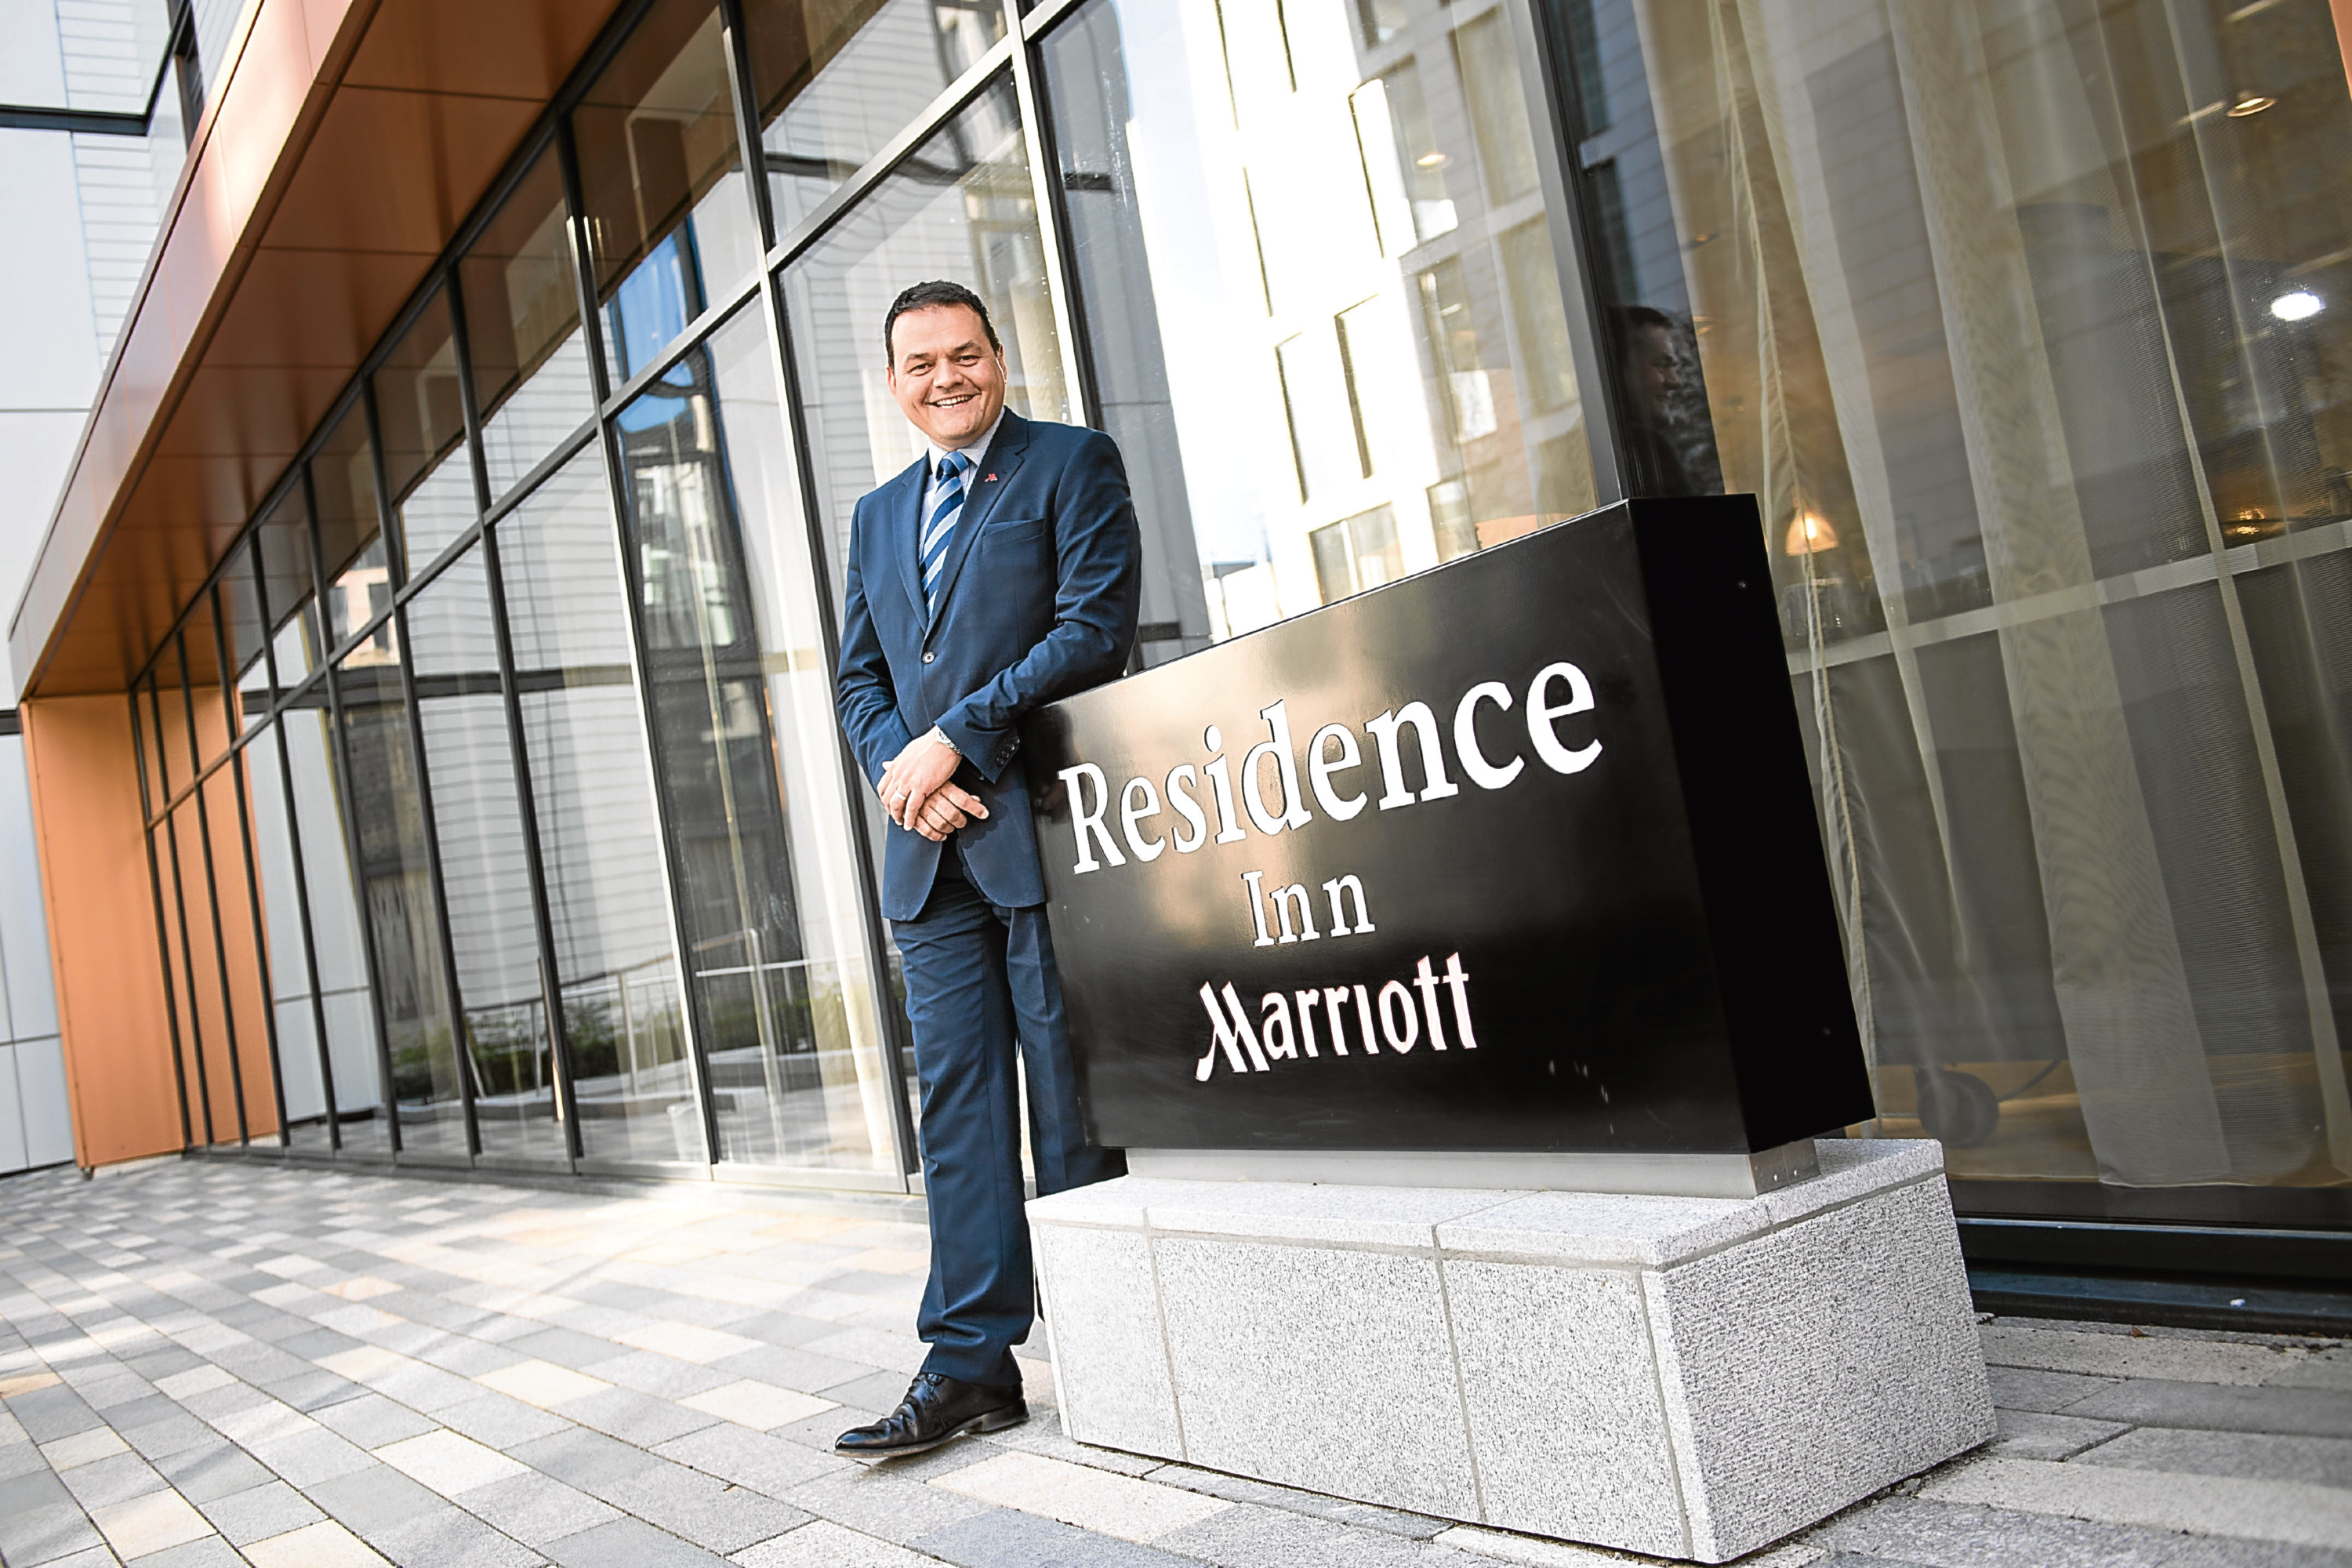 The  new Residence Inn by Marriott has opened to guests, located in Aberdeens new Marischal Square development. Pictured is Chris Wayne- Willis, General Manager, Scotland & North Cluster, Marriott.